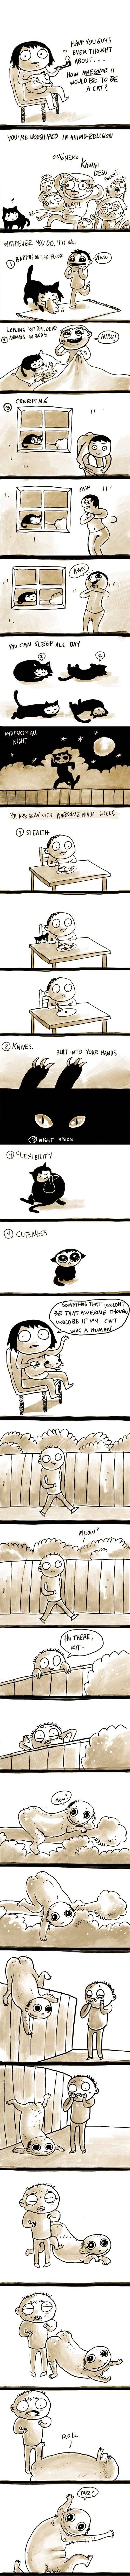 Being a Cat is Awesome